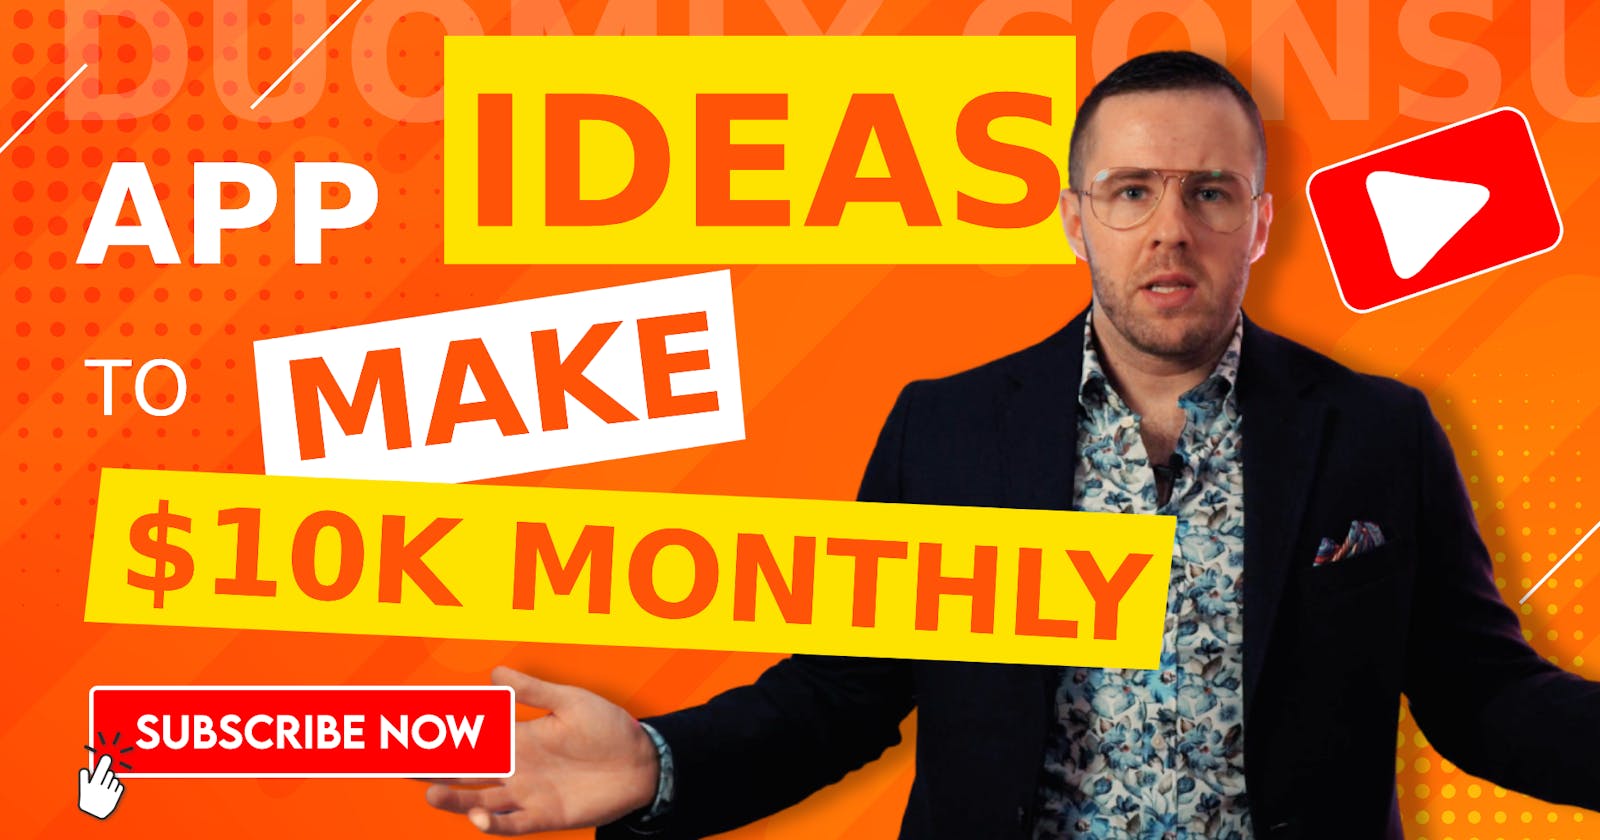 11 Profitable App Ideas You can Build: Quickest Way to $10K+ per Month